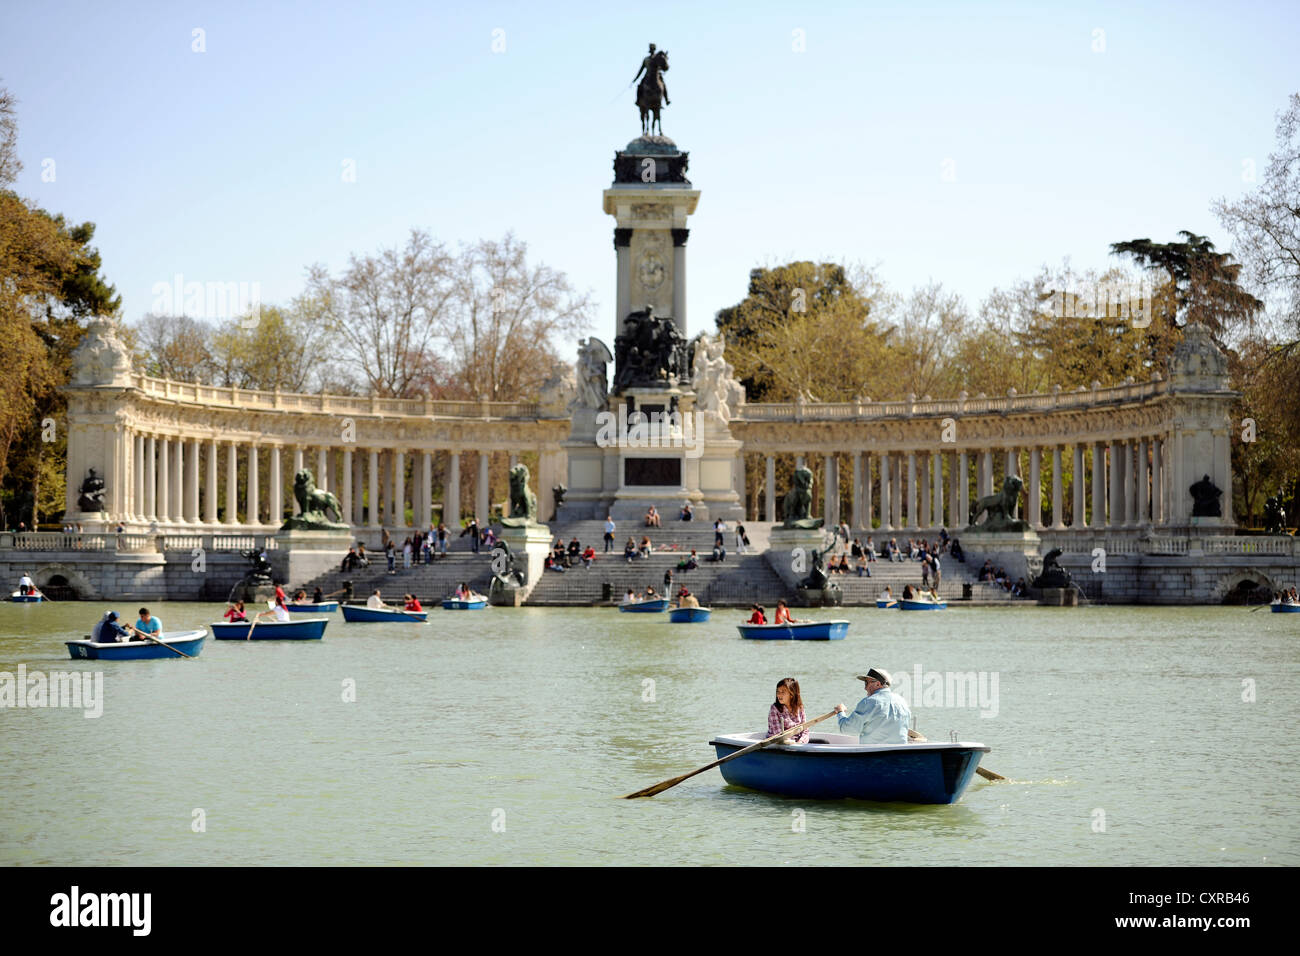 Monument to Alfonso XII. and a man-made lake in the Buen Retiro Park, Parque del Buen Retiro, Madrid, Spain, Europe Stock Photo